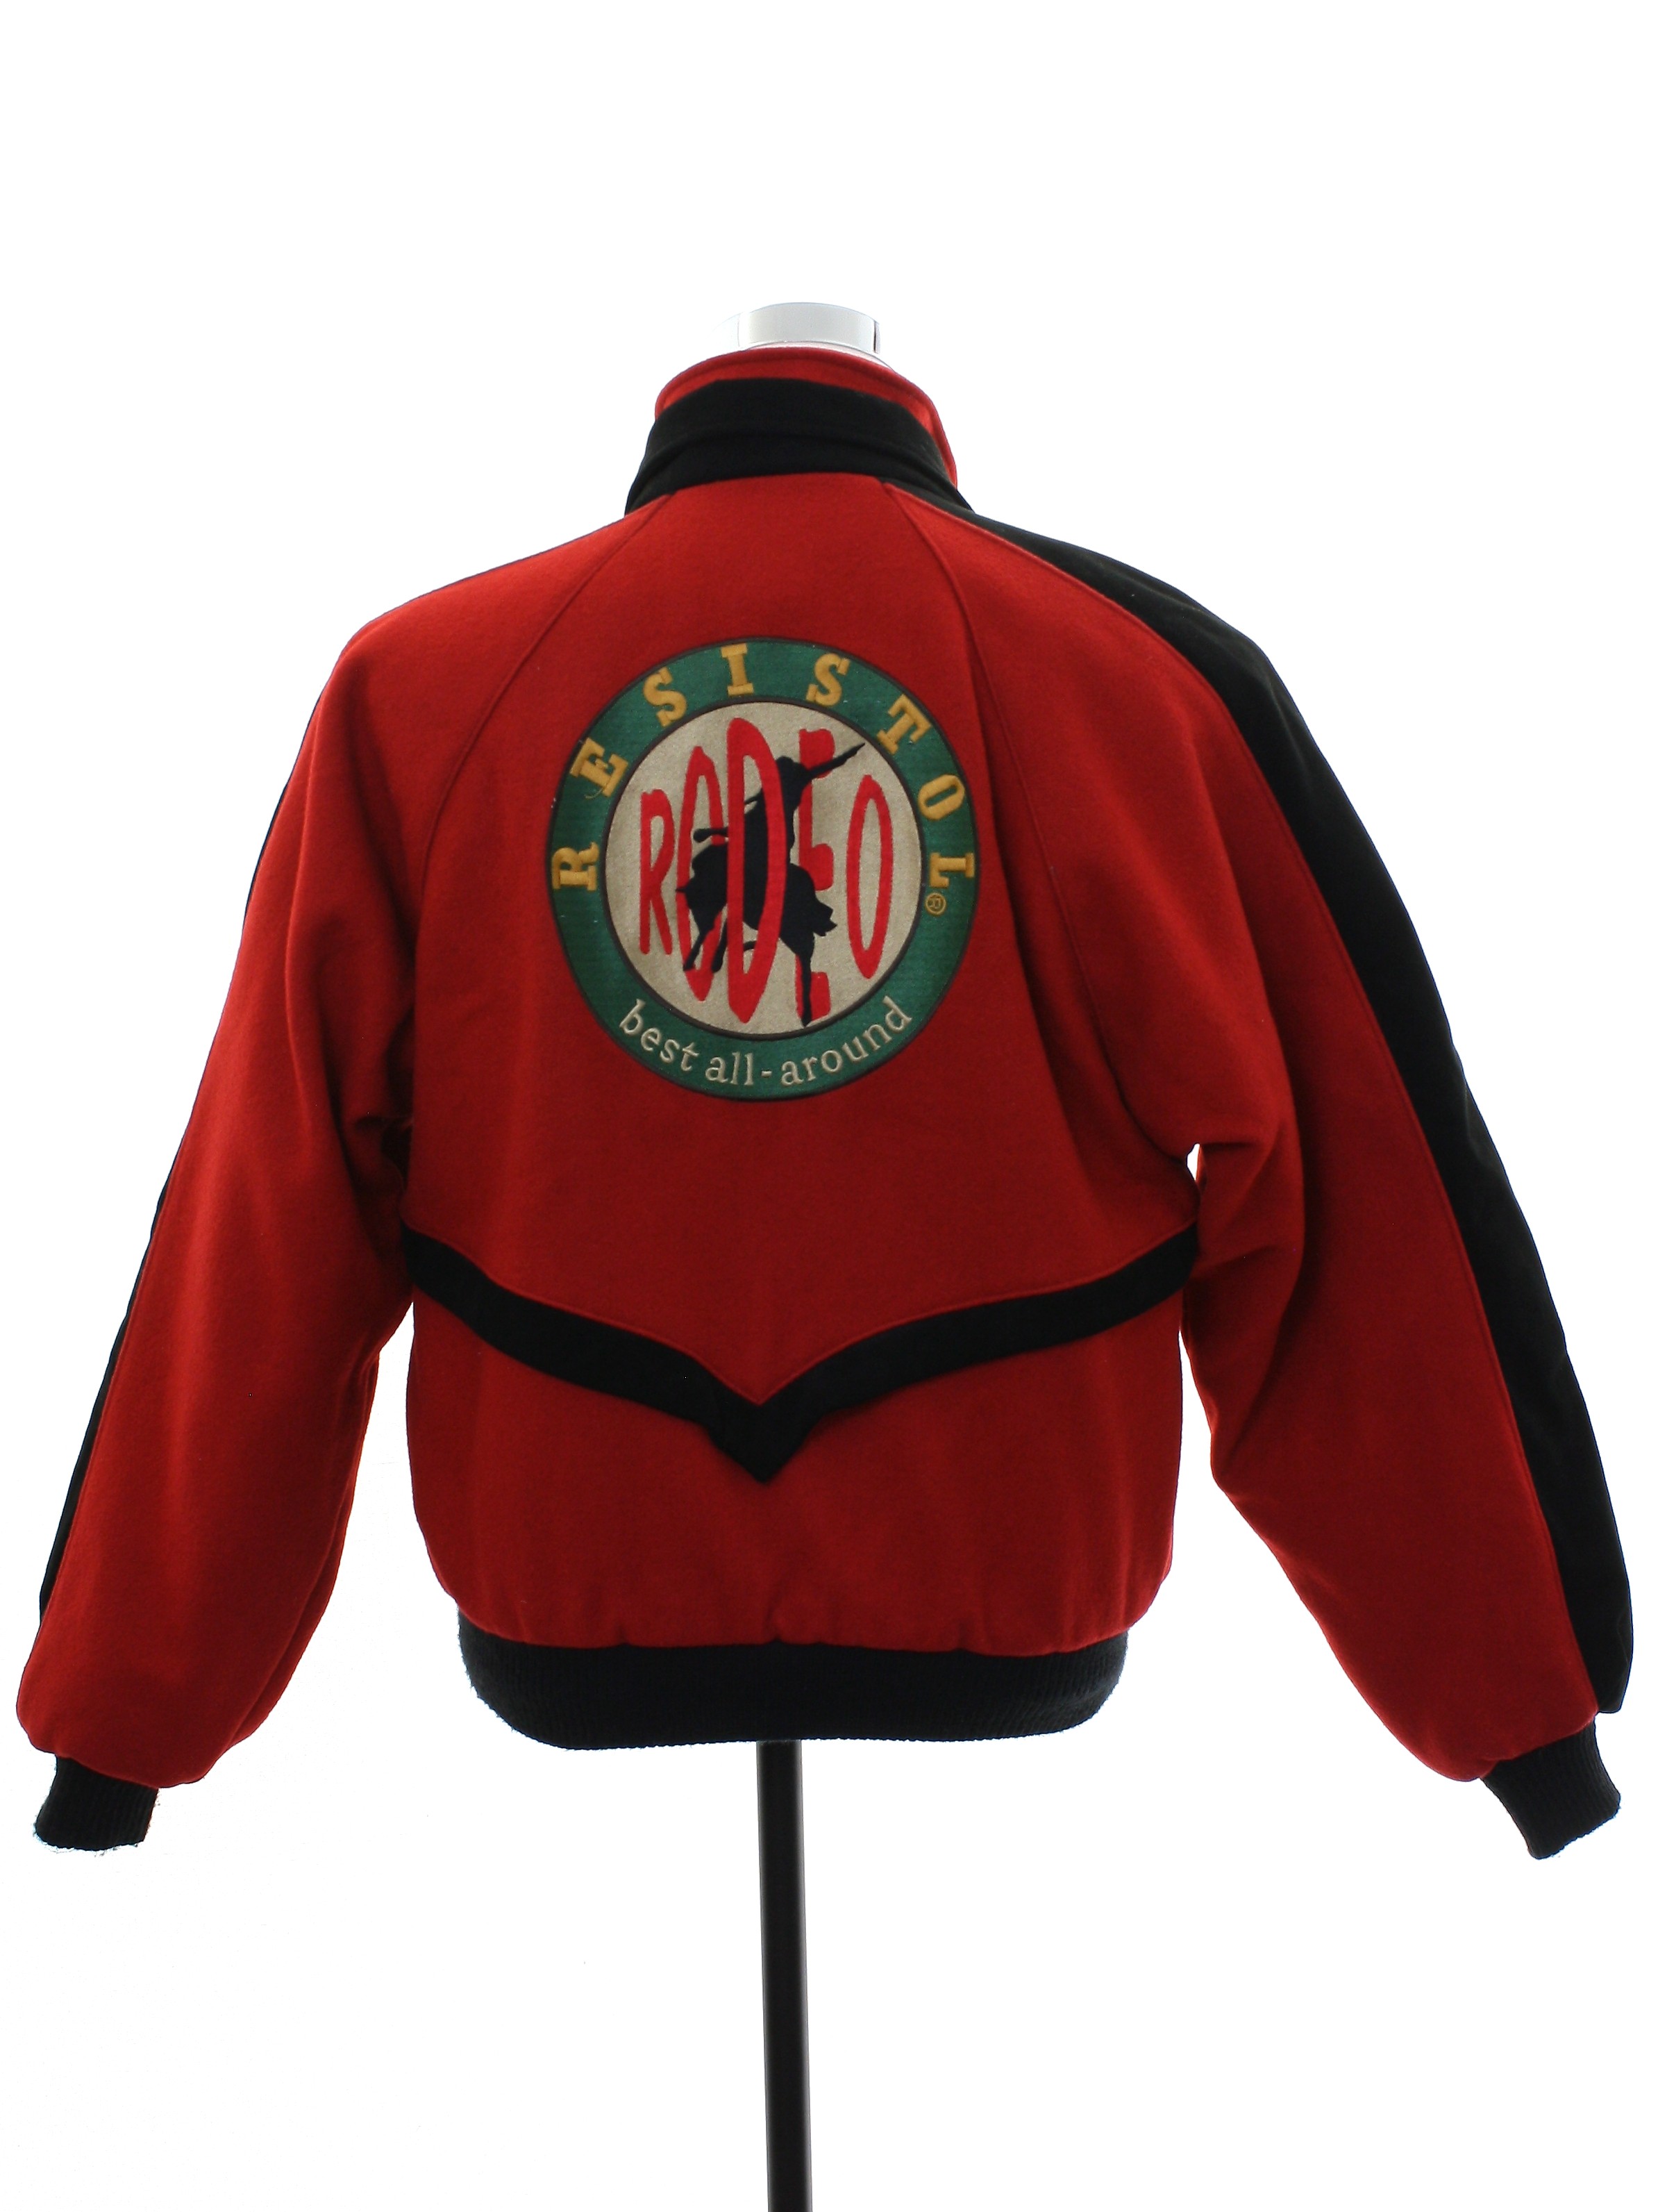 1990's Retro Jacket: Early 90s -Resistol Rodeo- Mens red background ...